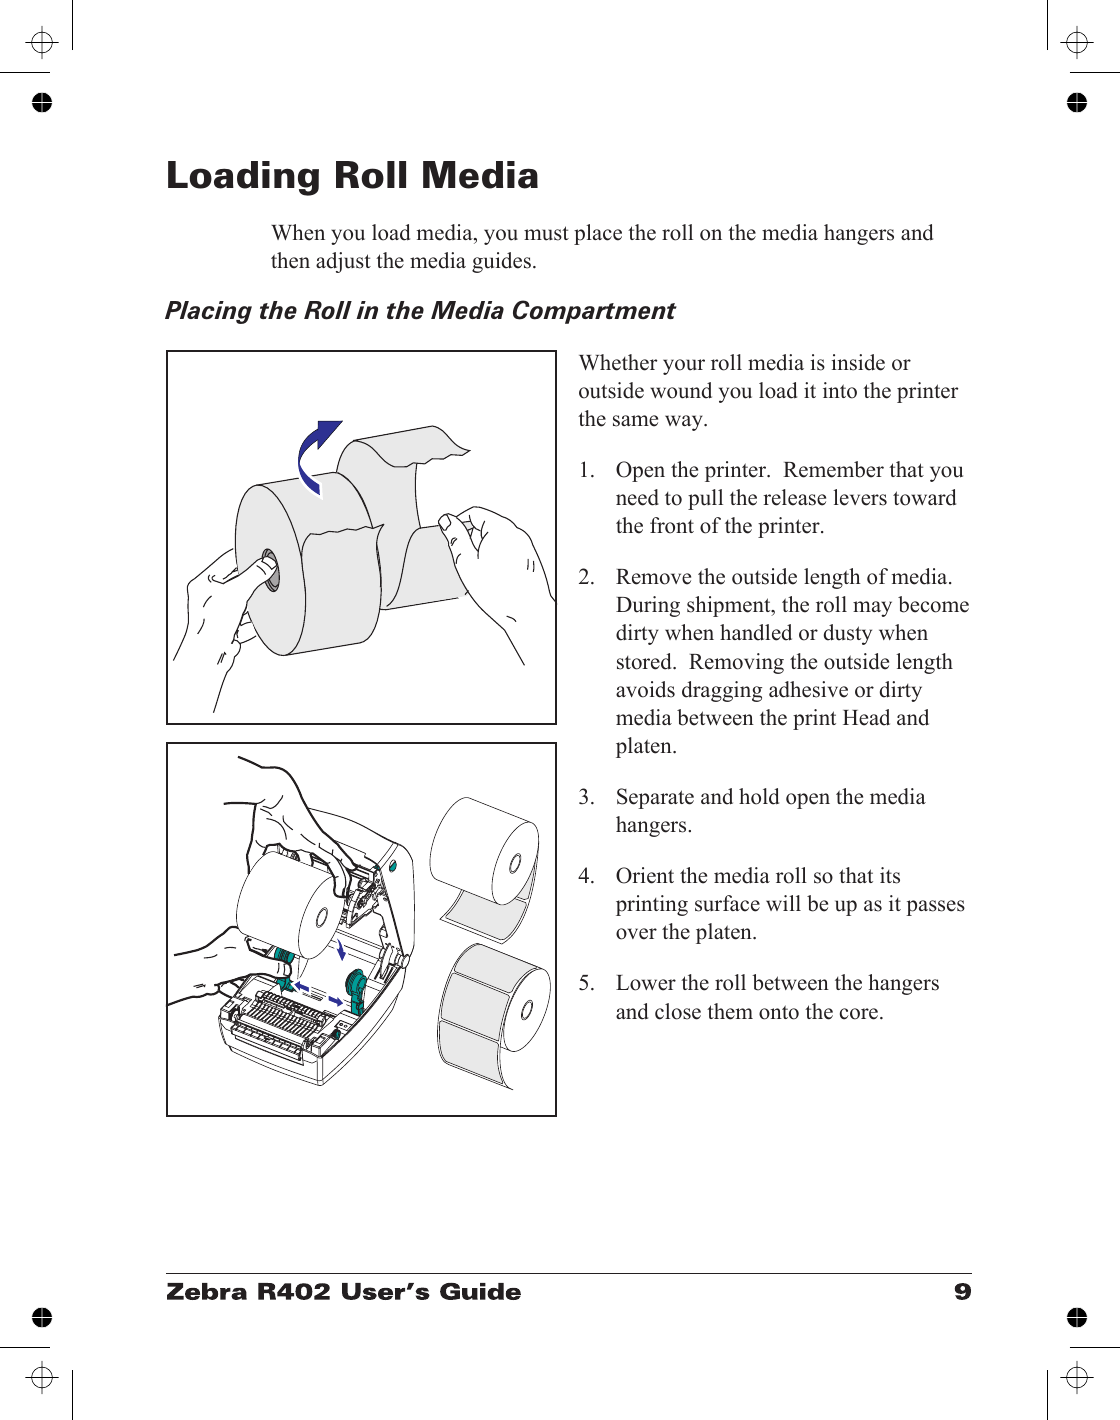 Loading Roll MediaWhen you load media, you must place the roll on the media hangers andthen adjust the media guides.Placing the Roll in the Media CompartmentWhether your roll media is inside oroutside wound you load it into the printerthe same way.1. Open the printer.  Remember that youneed to pull the release levers towardthe front of the printer.2. Remove the outside length of media.During shipment, the roll may becomedirty when handled or dusty whenstored.  Removing the outside lengthavoids dragging adhesive or dirtymedia between the print Head andplaten.3. Separate and hold open the mediahangers.4. Orient the media roll so that itsprinting surface will be up as it passesover the platen.5. Lower the roll between the hangersand close them onto the core.